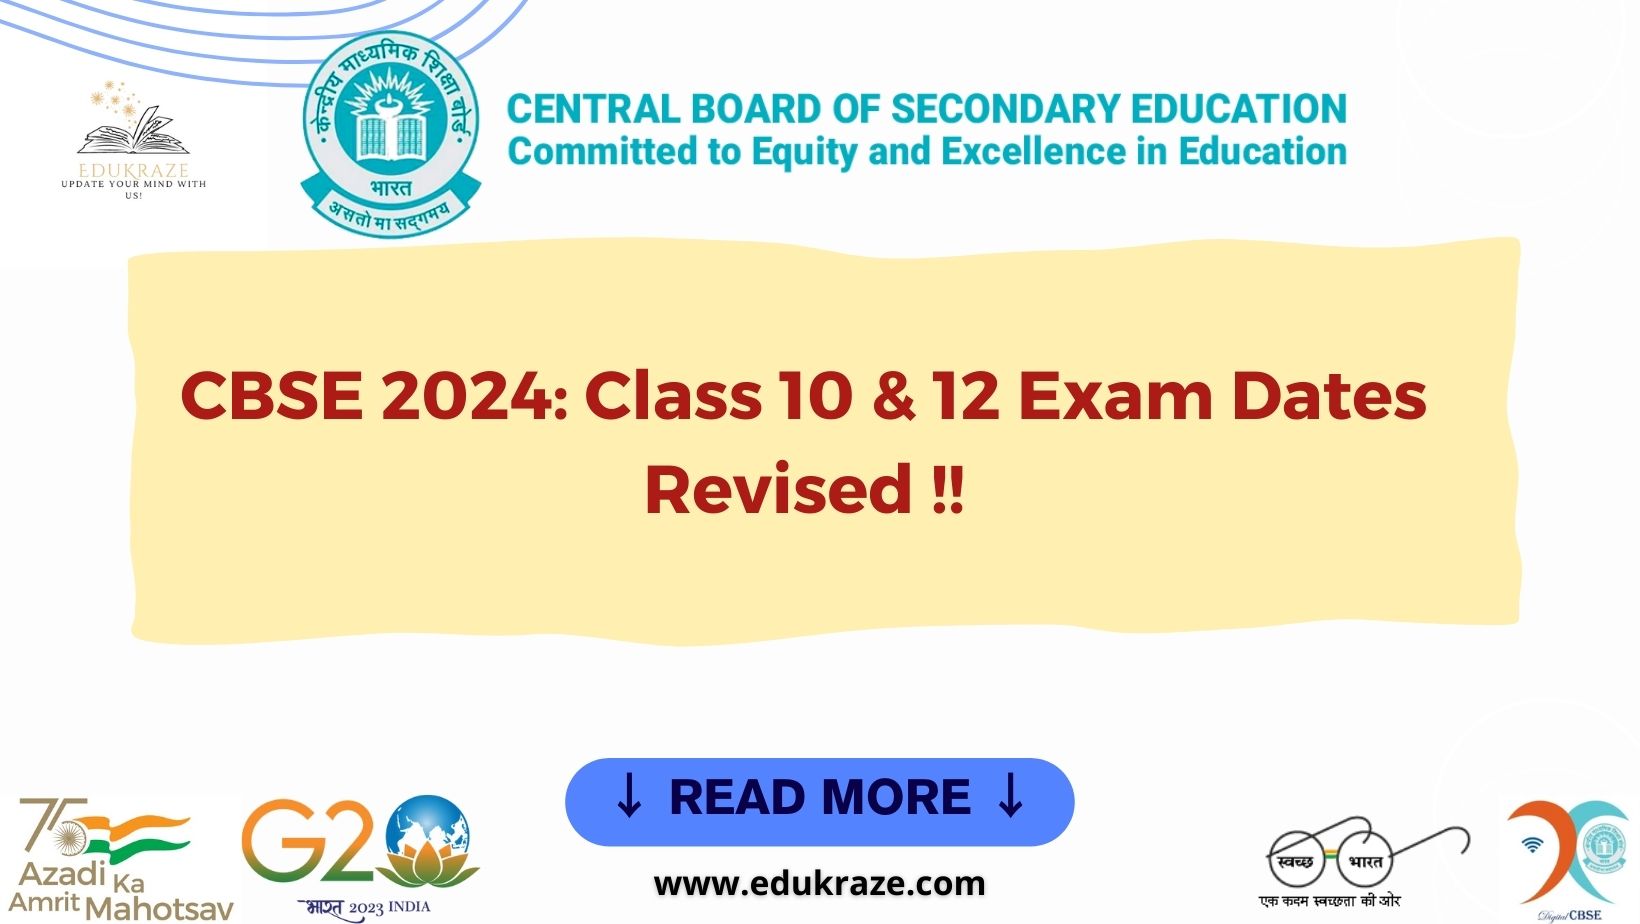 CBSE Date Sheet 2024 Revised: Changes in Class 10 and 12 Exam Dates Unveiled